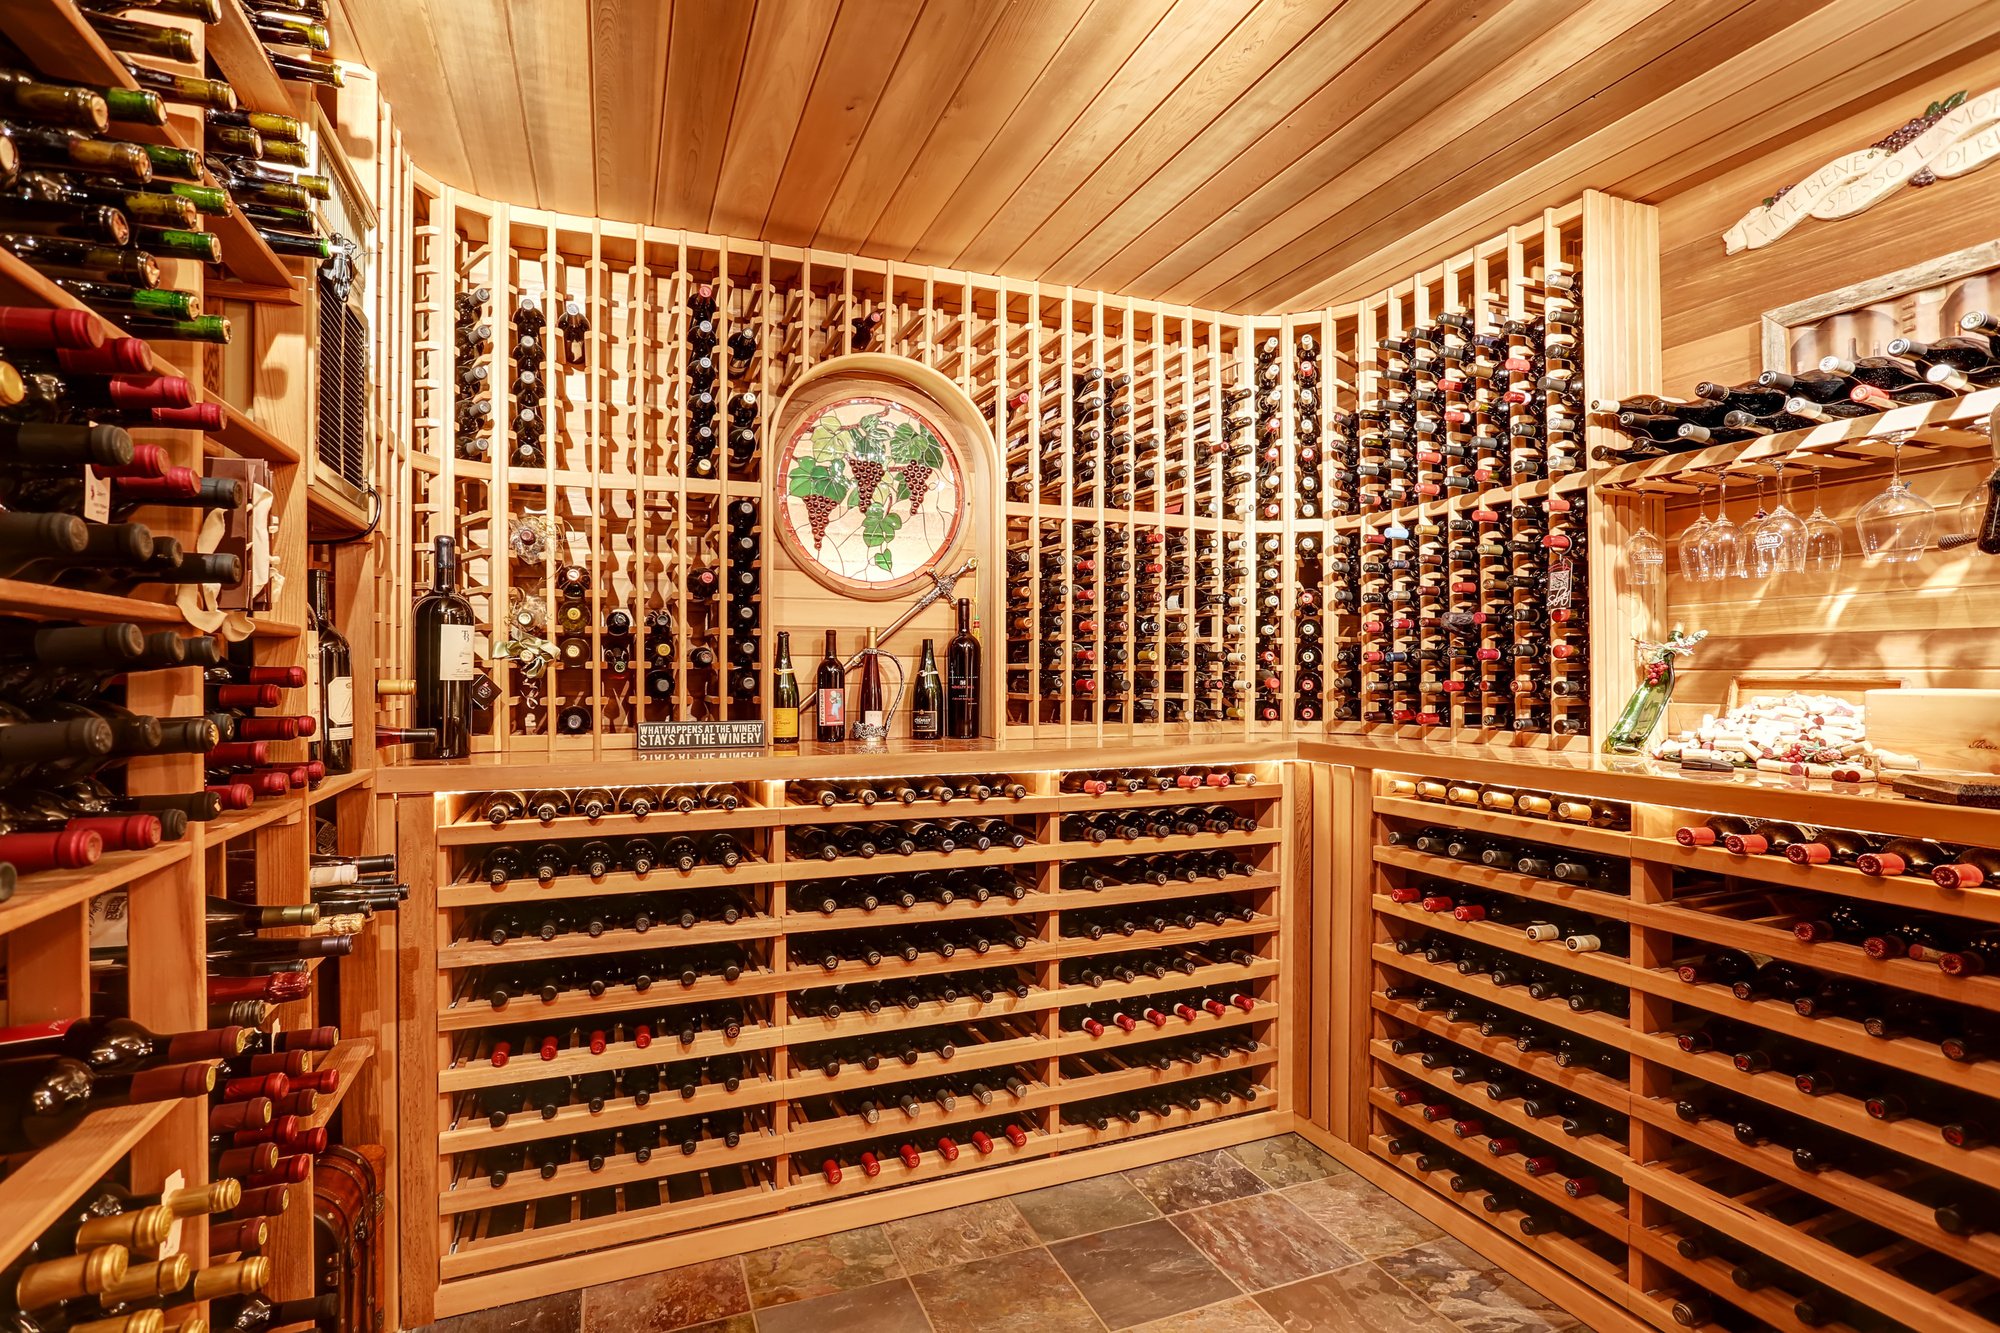 DIY Project: How to Build a Basement Wine Cellar